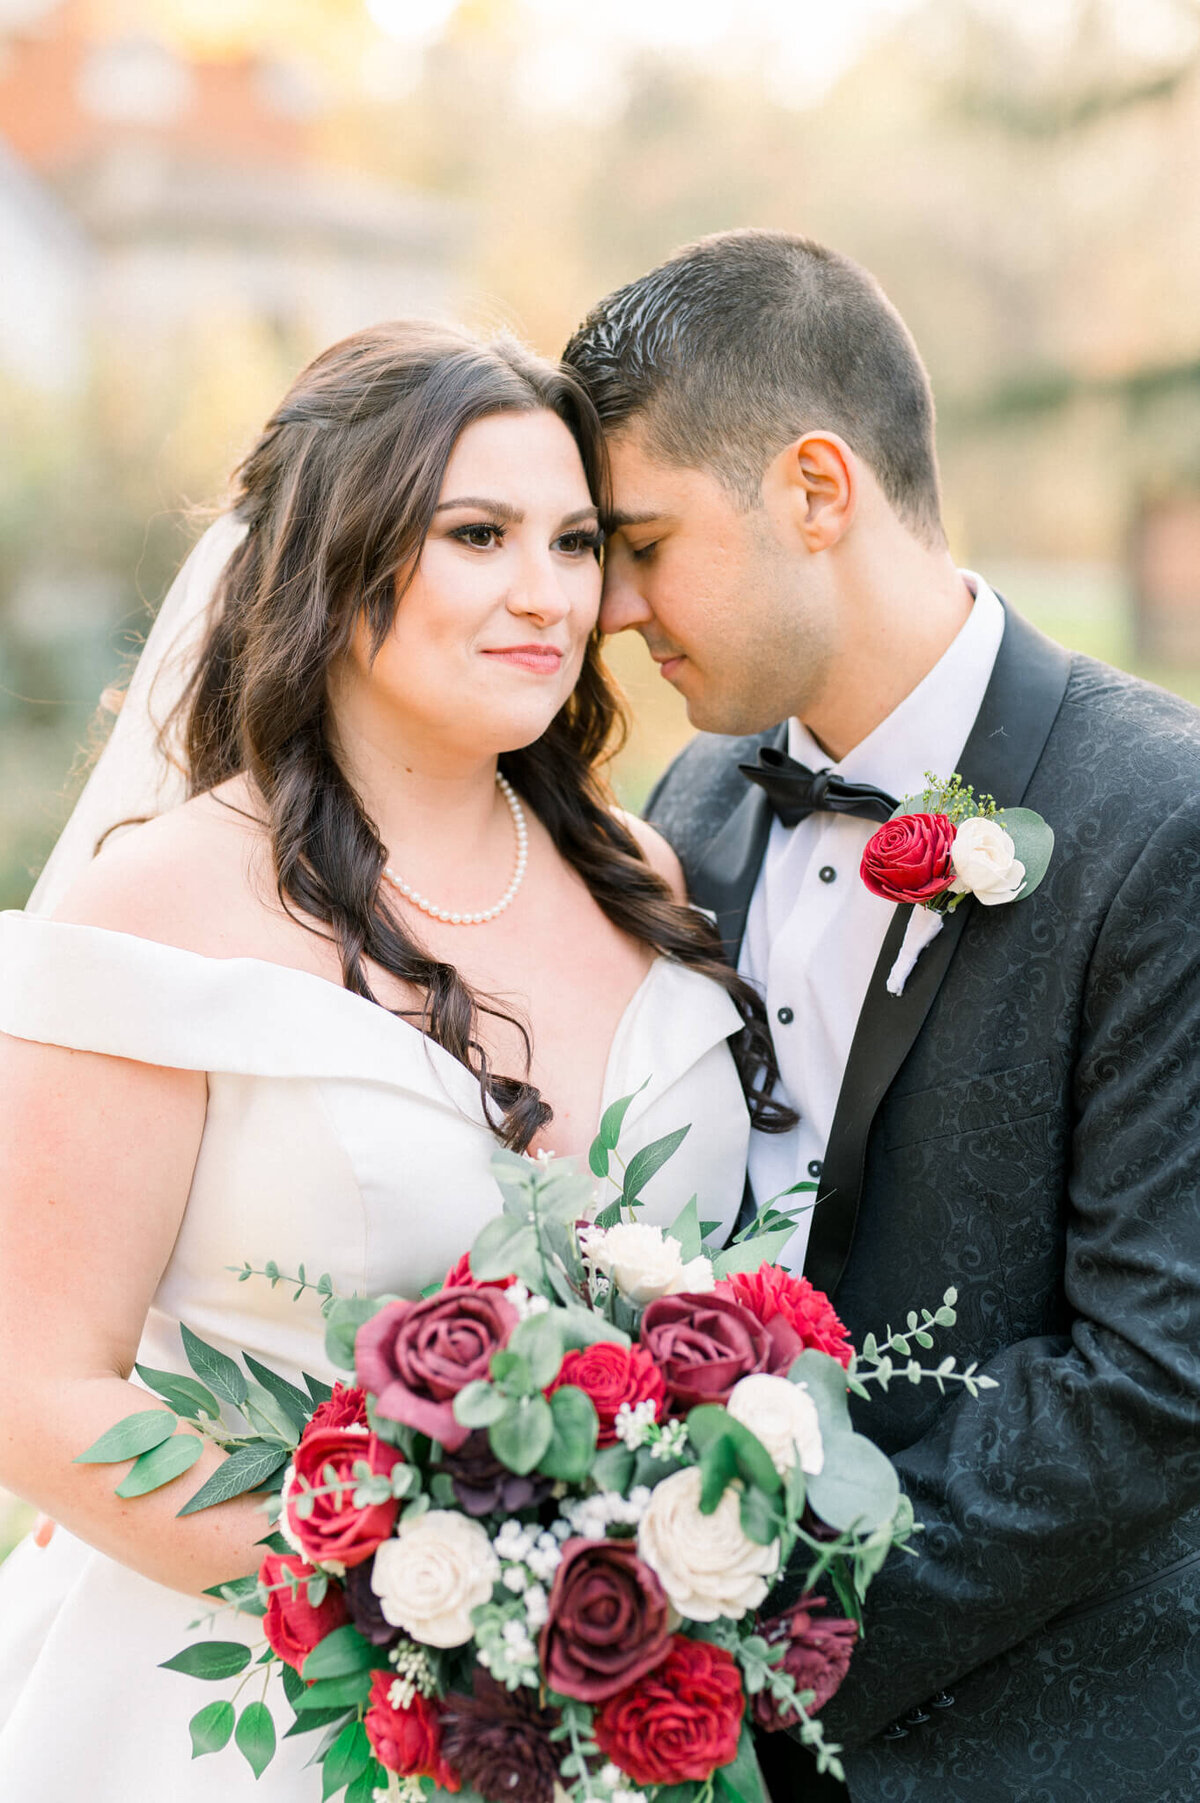 Bride and groom snuggle close for wedding portrait